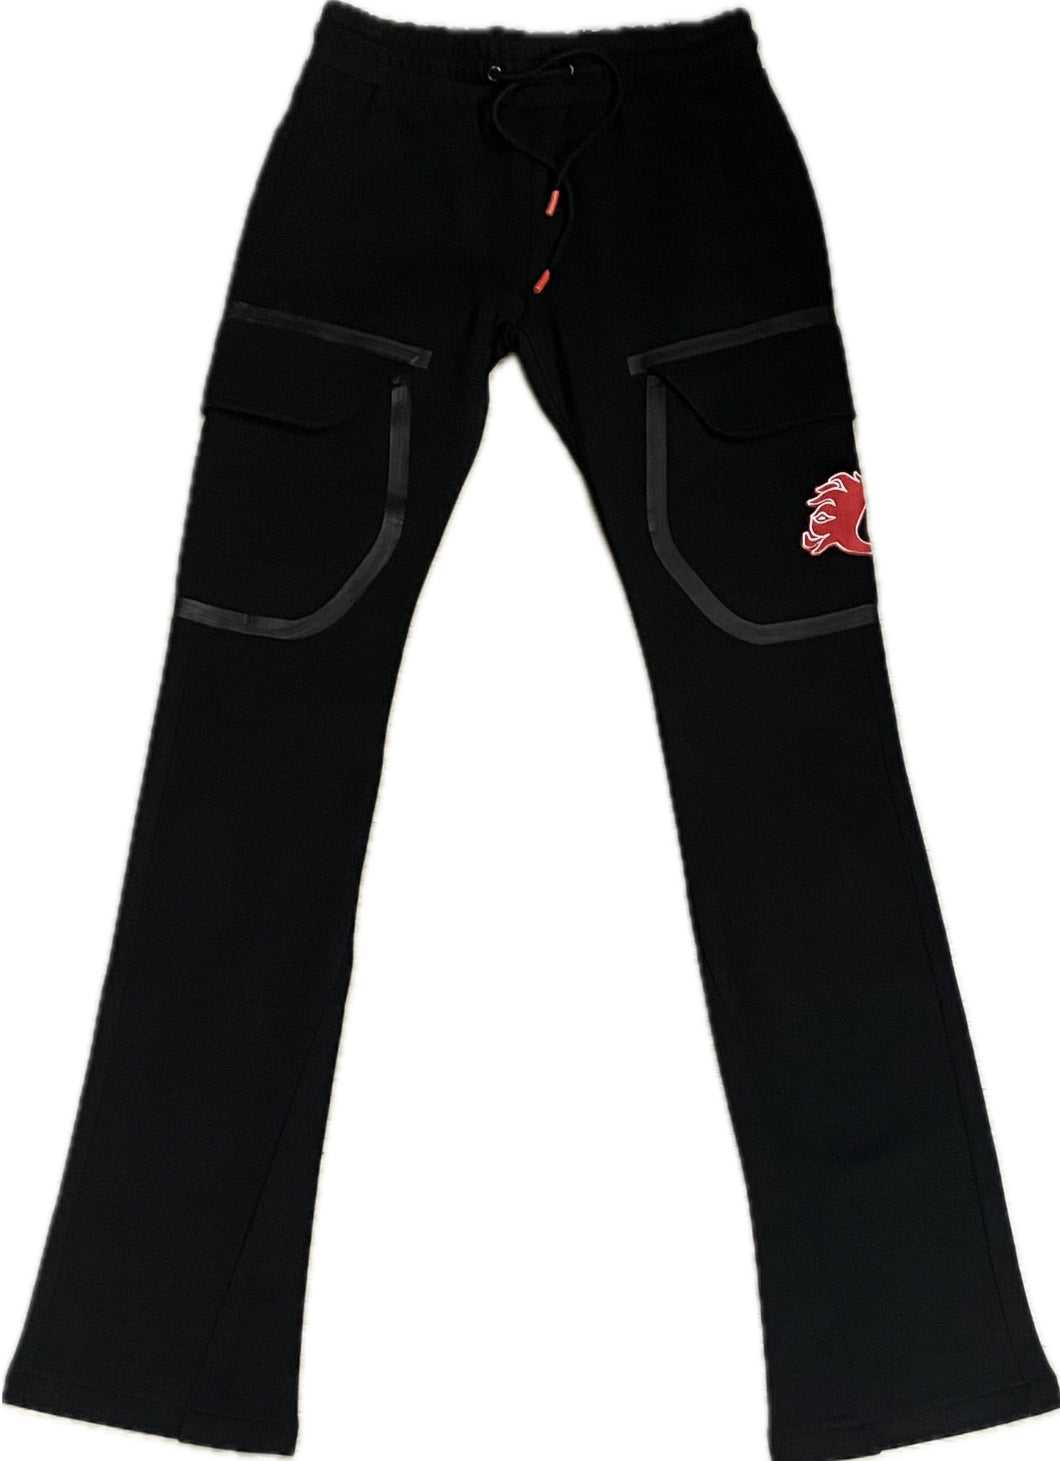 COOKIES Enzo Fleece Stacked Flare Fit Sweatpant With Paneling and Print Detail BLACK